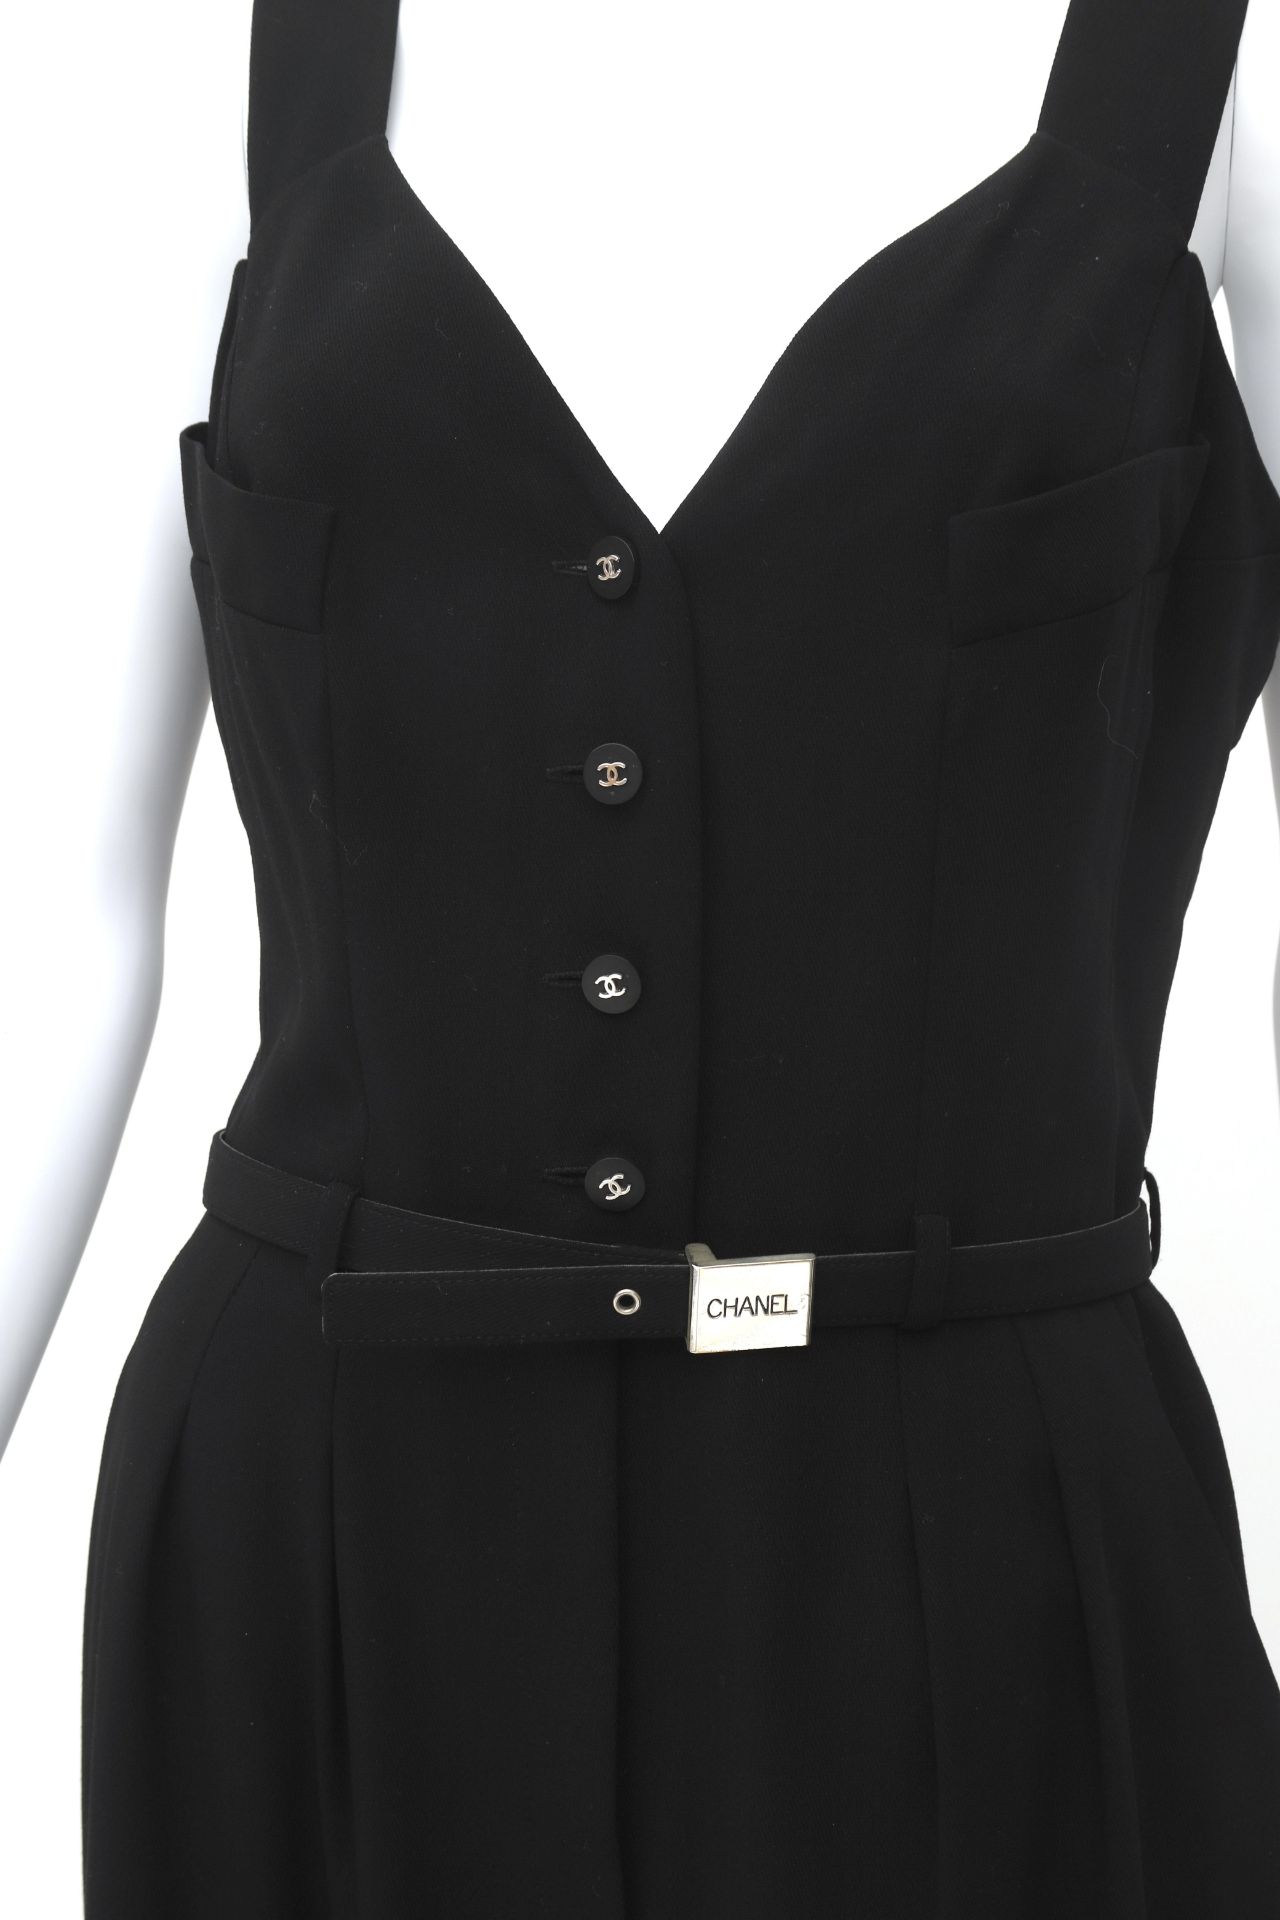 A Chanel Boutique black dress with belt. The belt has a silver-colored buckle with Chanel on it. - Bild 5 aus 6